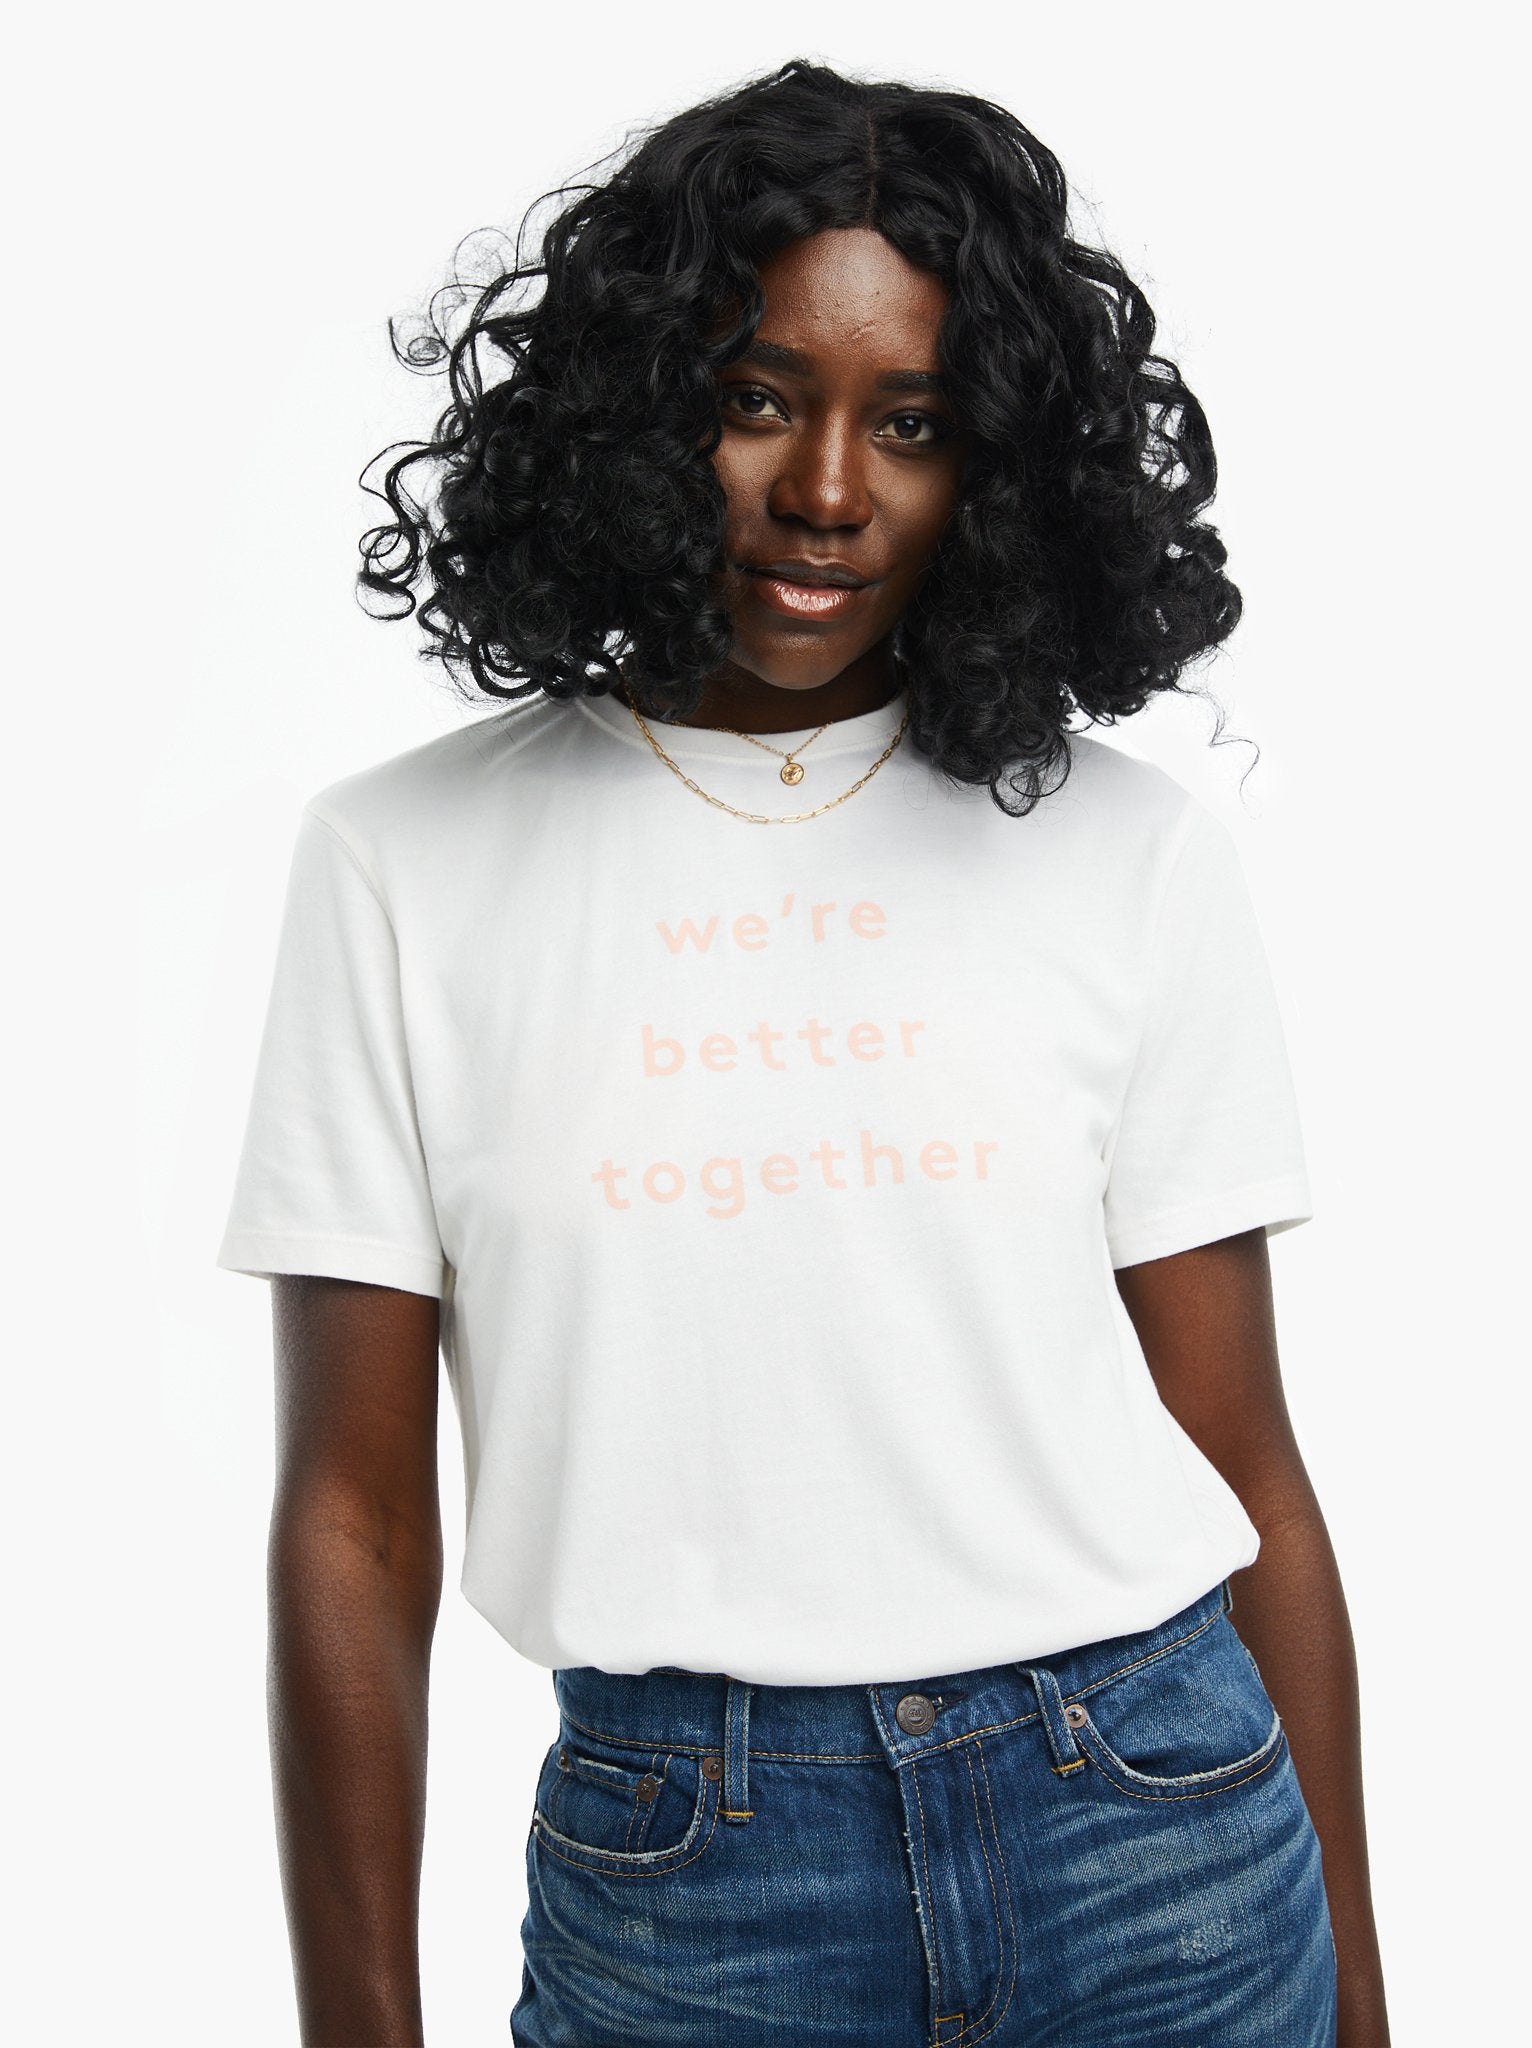 Community Collection T-Shirt: Together